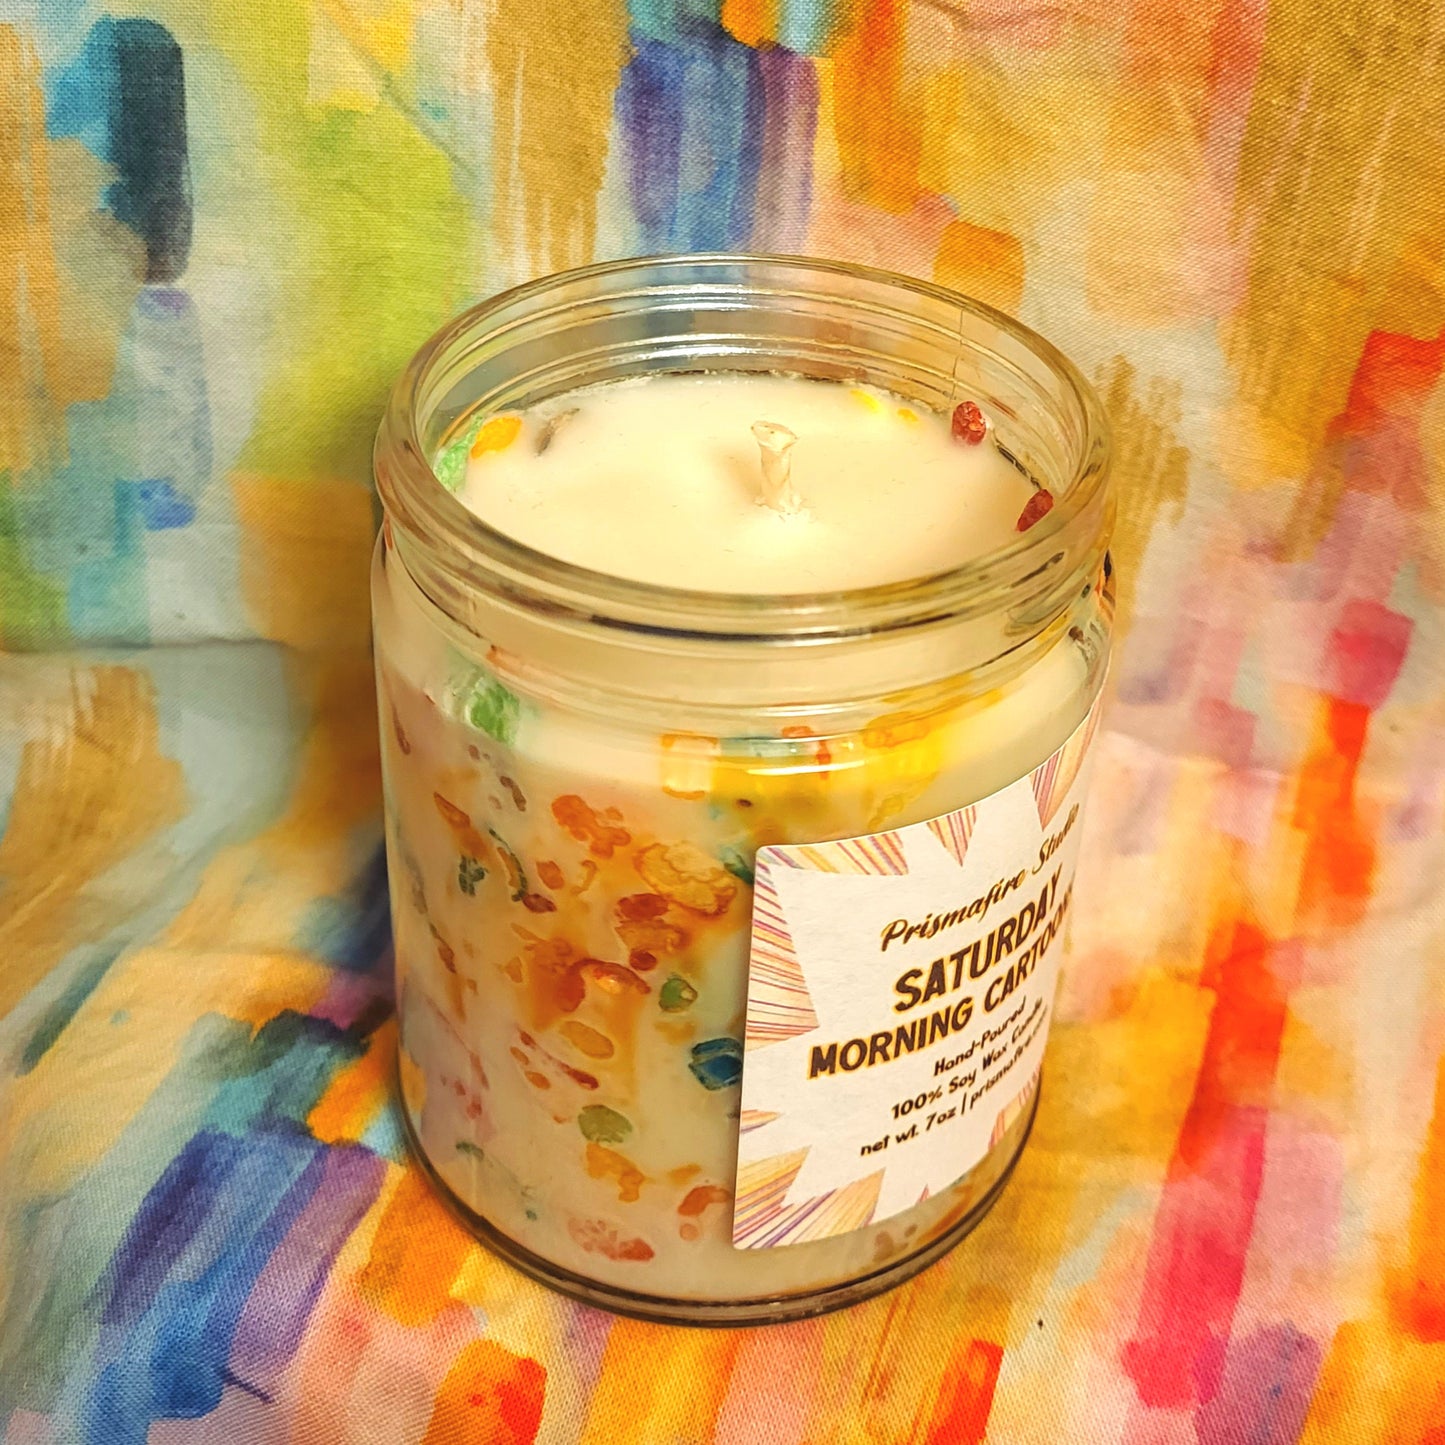 Saturday Morning Cartoons Hand-poured Scented Soy Wax Candle 7oz